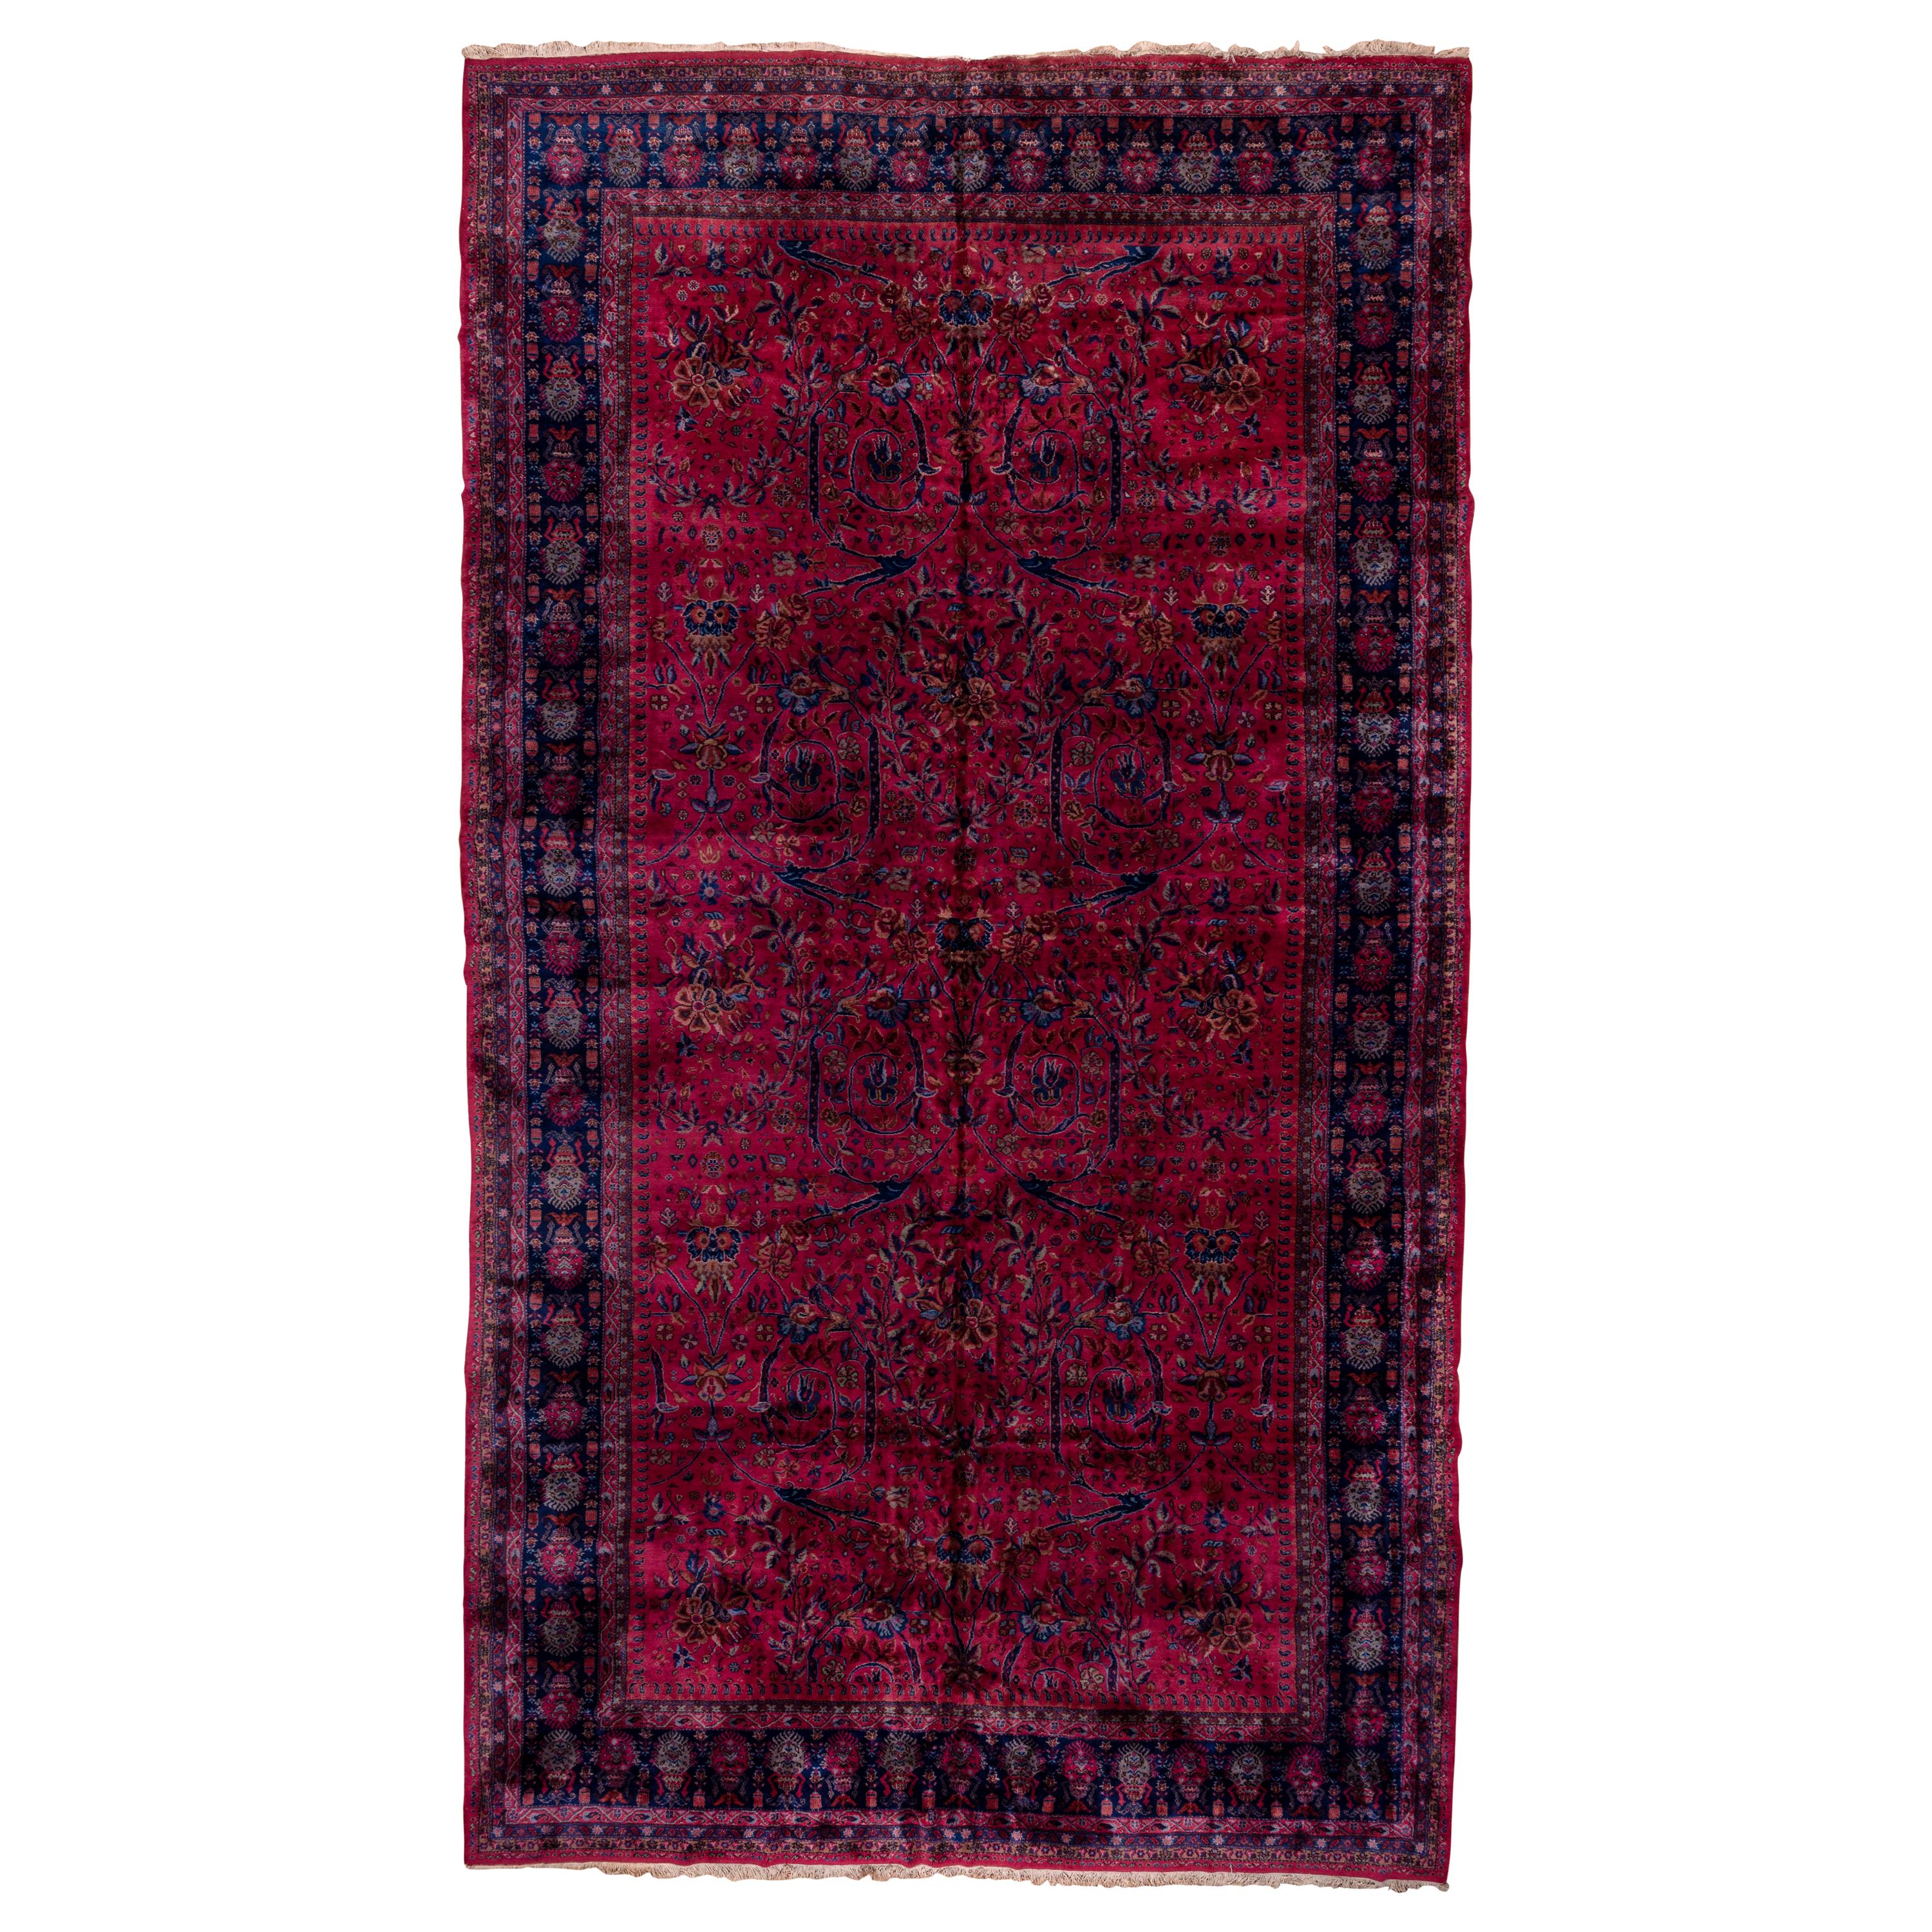 Turkish Sparta Mansion Carpet, Berry Colored Field, American Sarouk Inspired For Sale